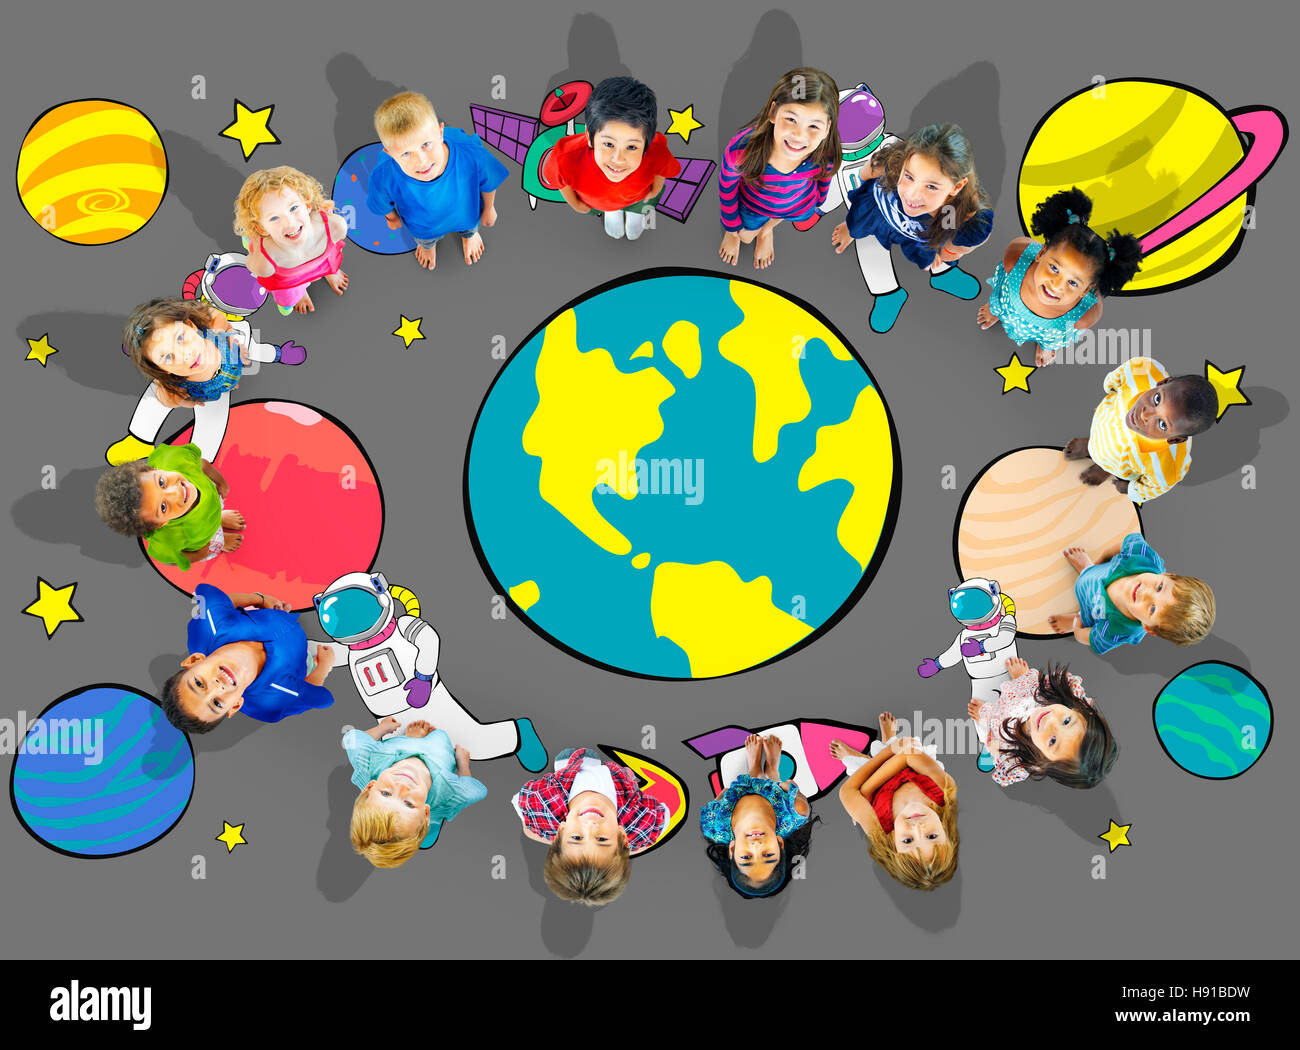 Planets Travel Dream Imagination Playful Space Universe Concept Stock Photo